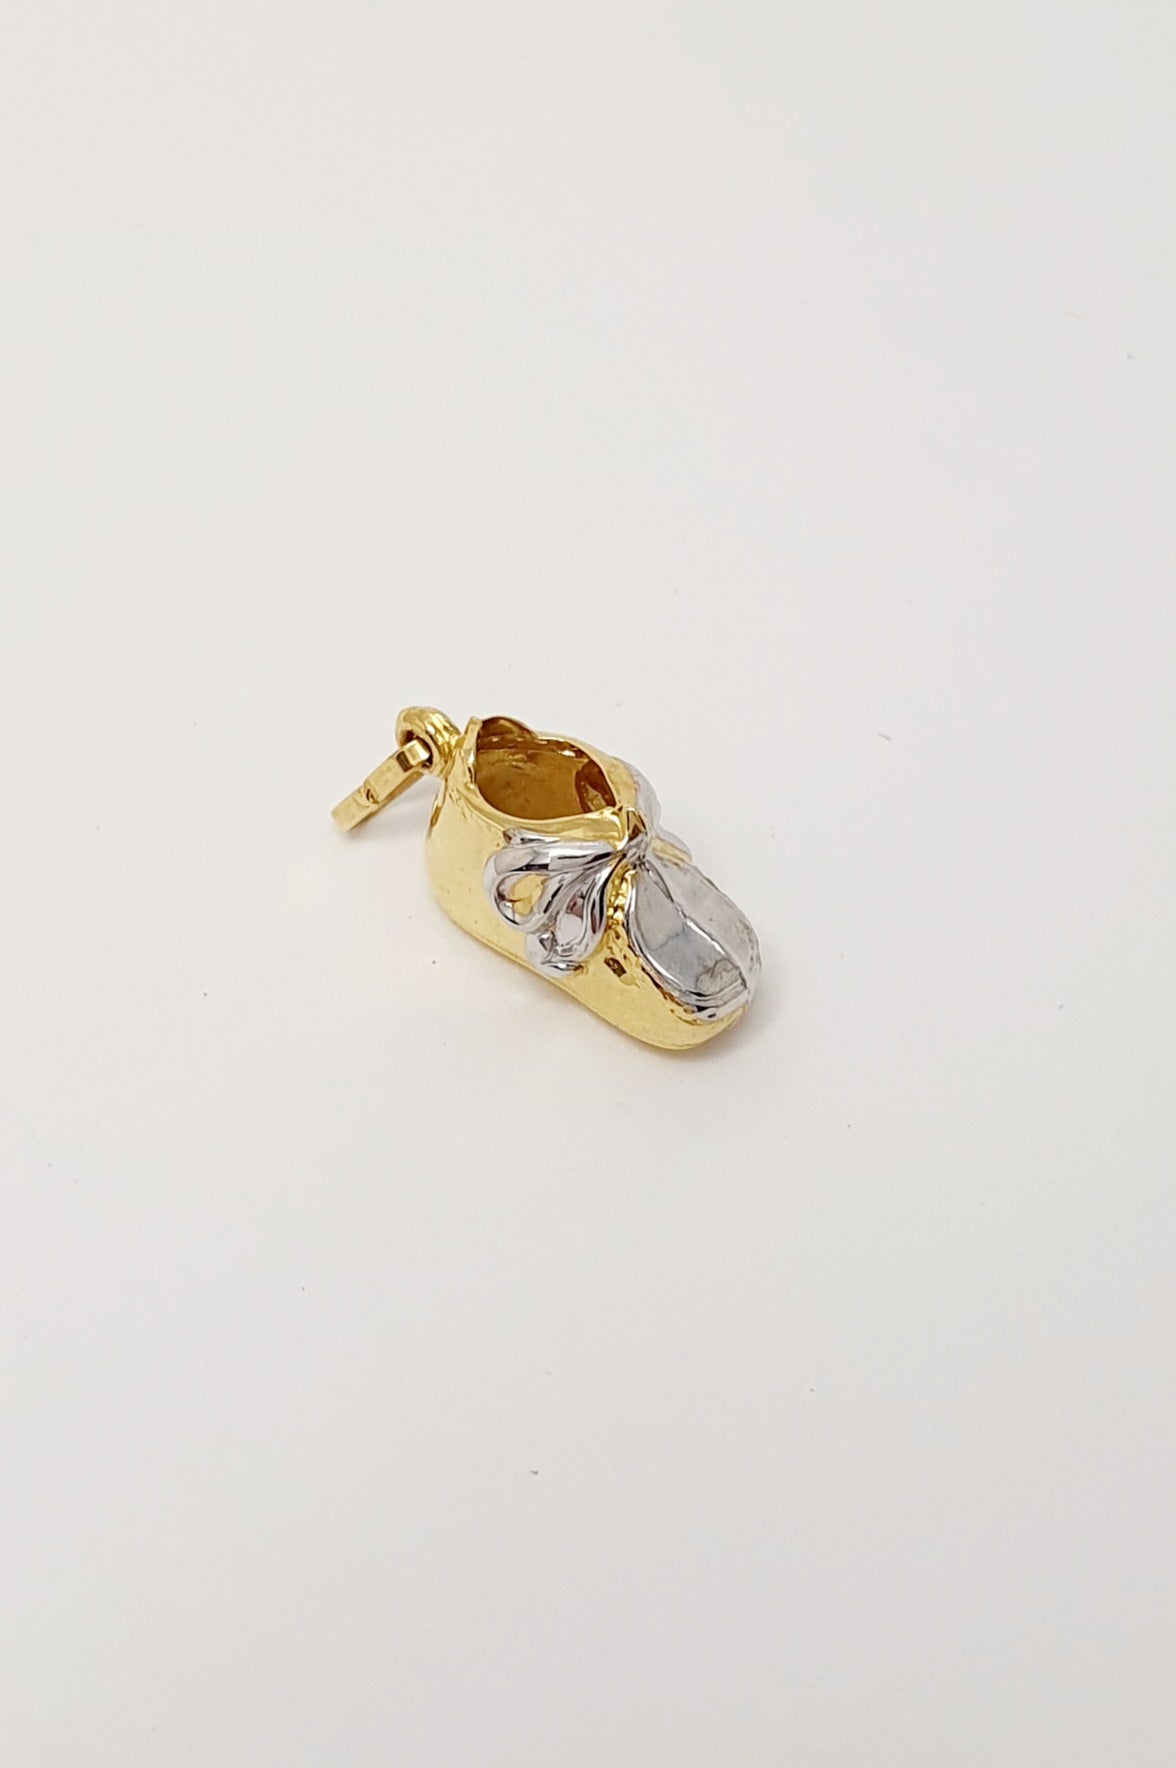 9ct Yellow Gold Baby Bootie Charm with White Gold Accent